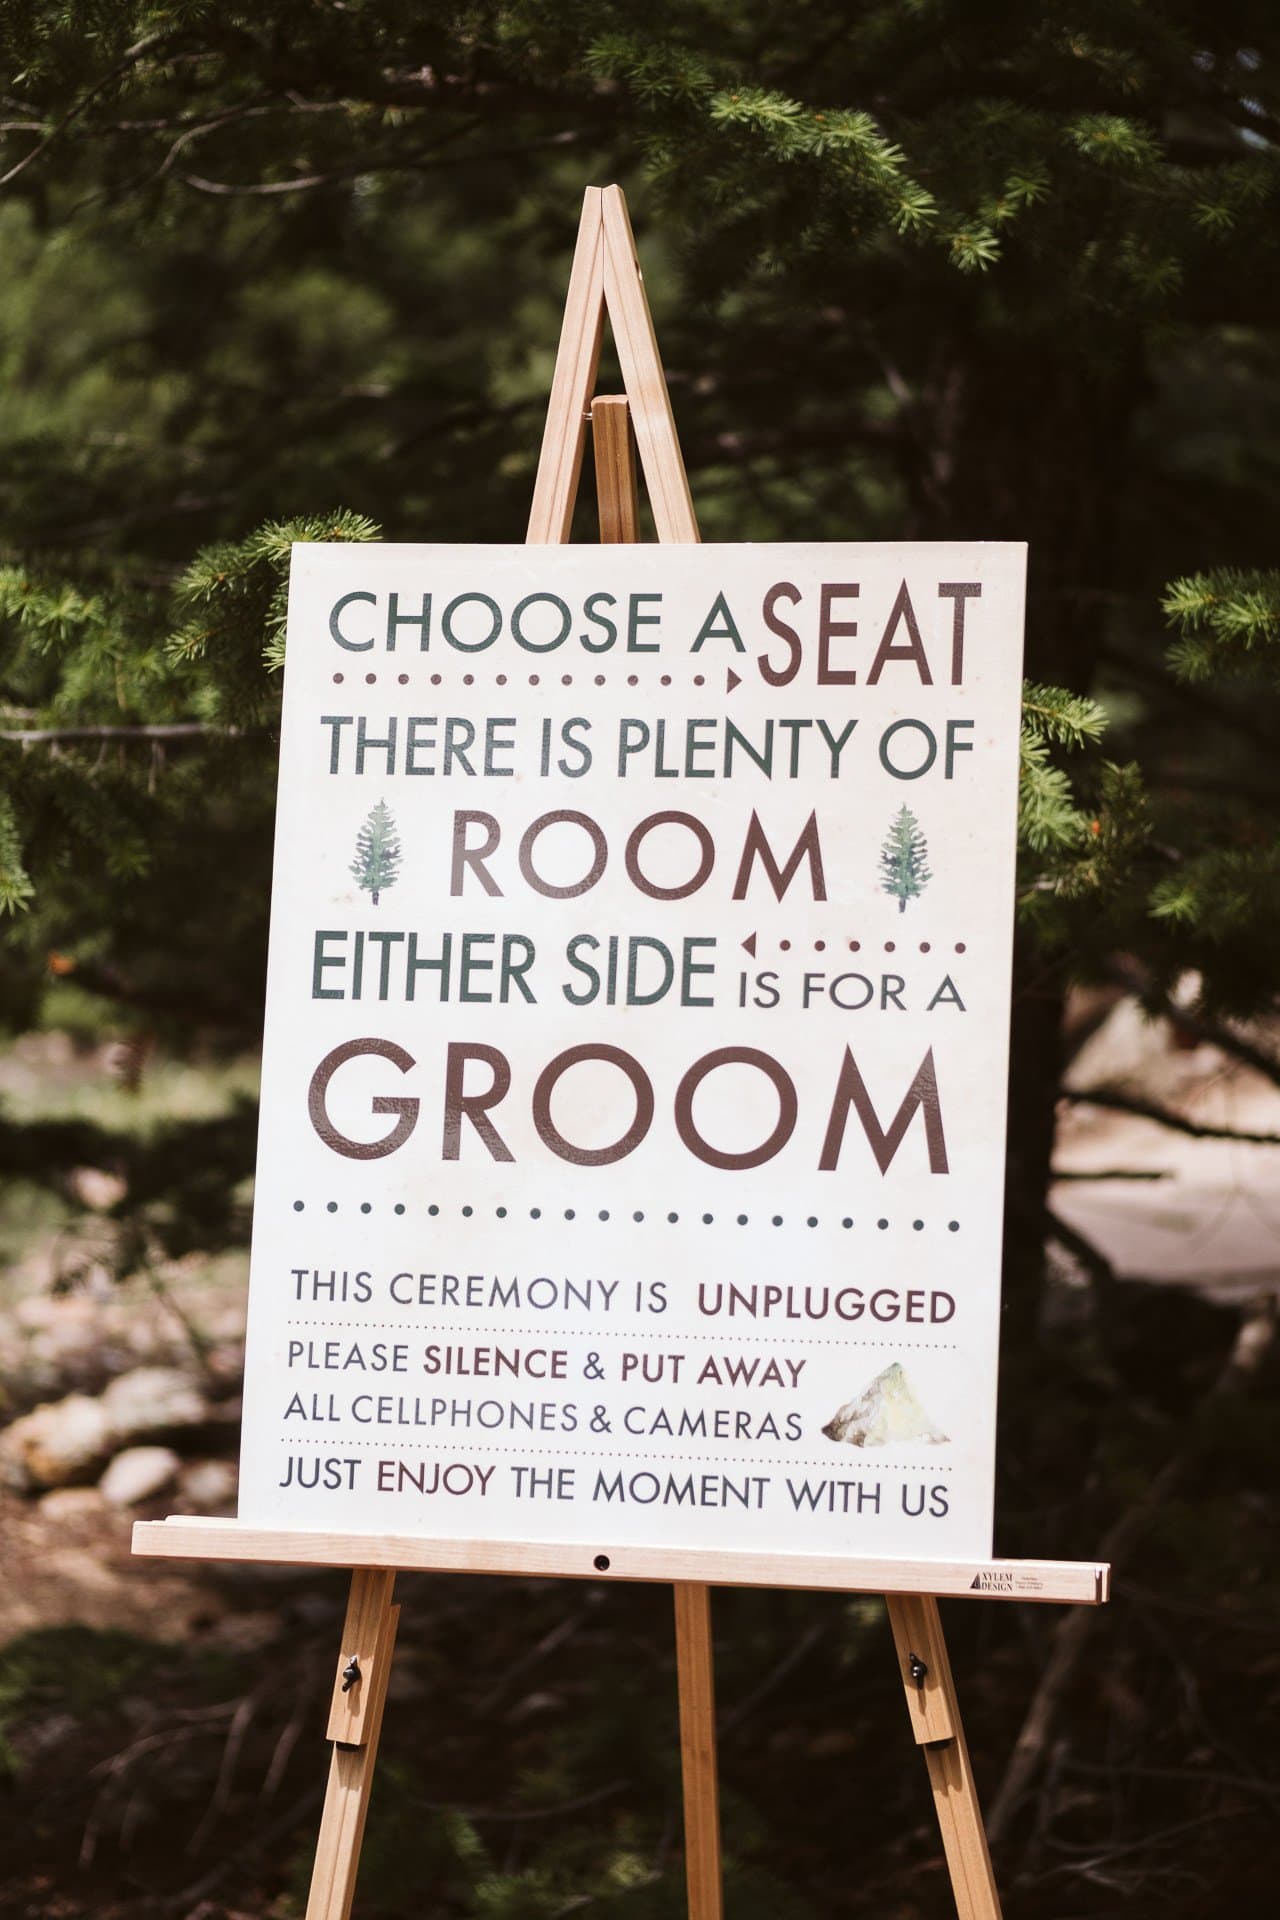 "Choose a seat there is plenty of room, either side is for a groom" ceremony sign at gay wedding